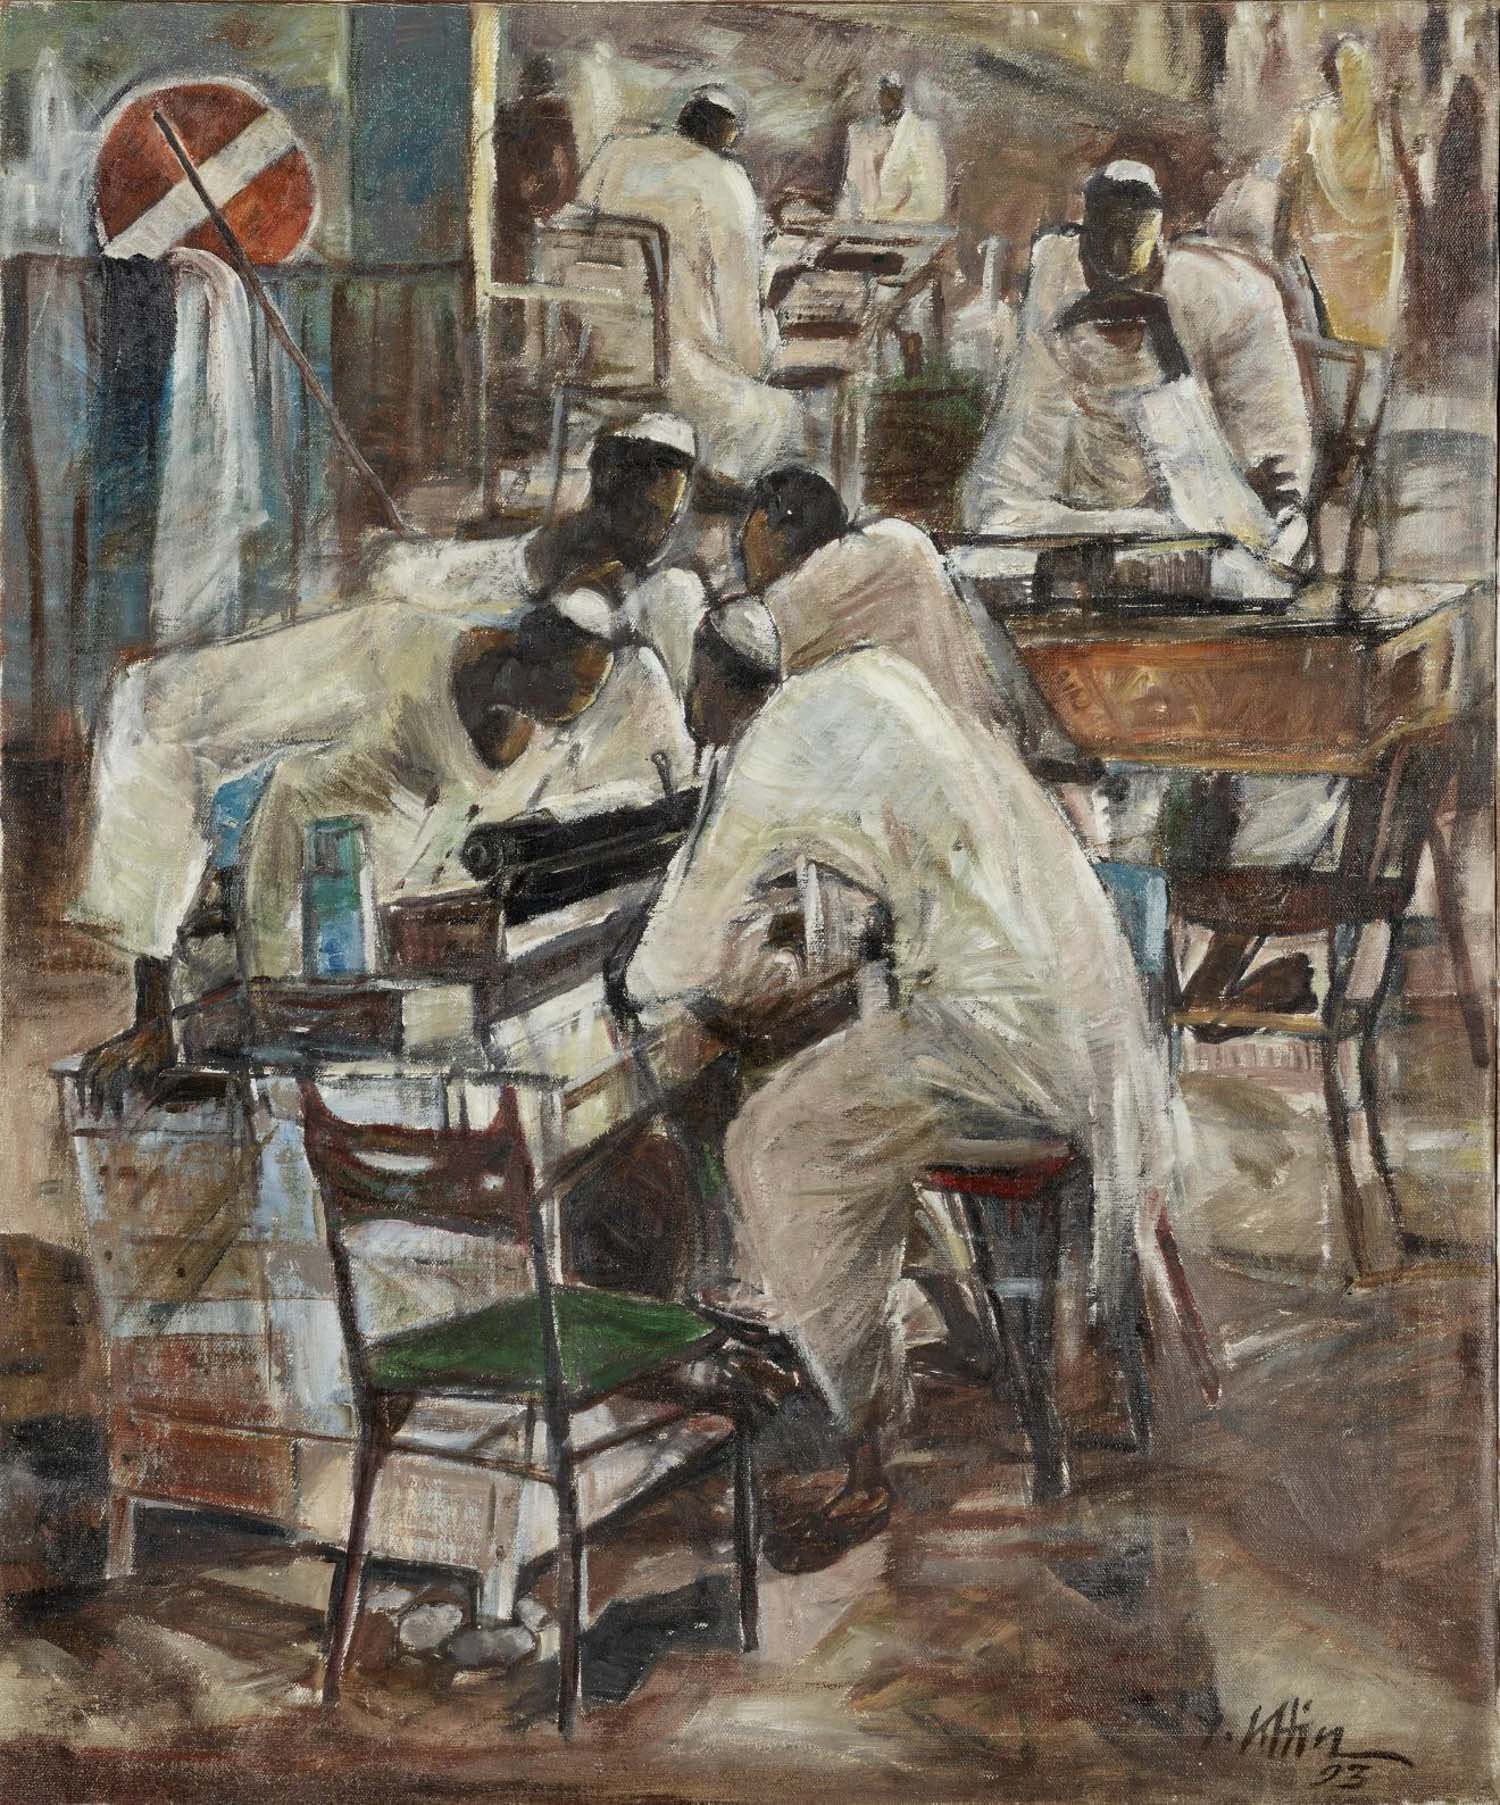  You Khin, ‘Untitled (Public Scribes)’, 1993, oil on canvas, 65 x 54cm. Collection of National Gallery Singapore. 